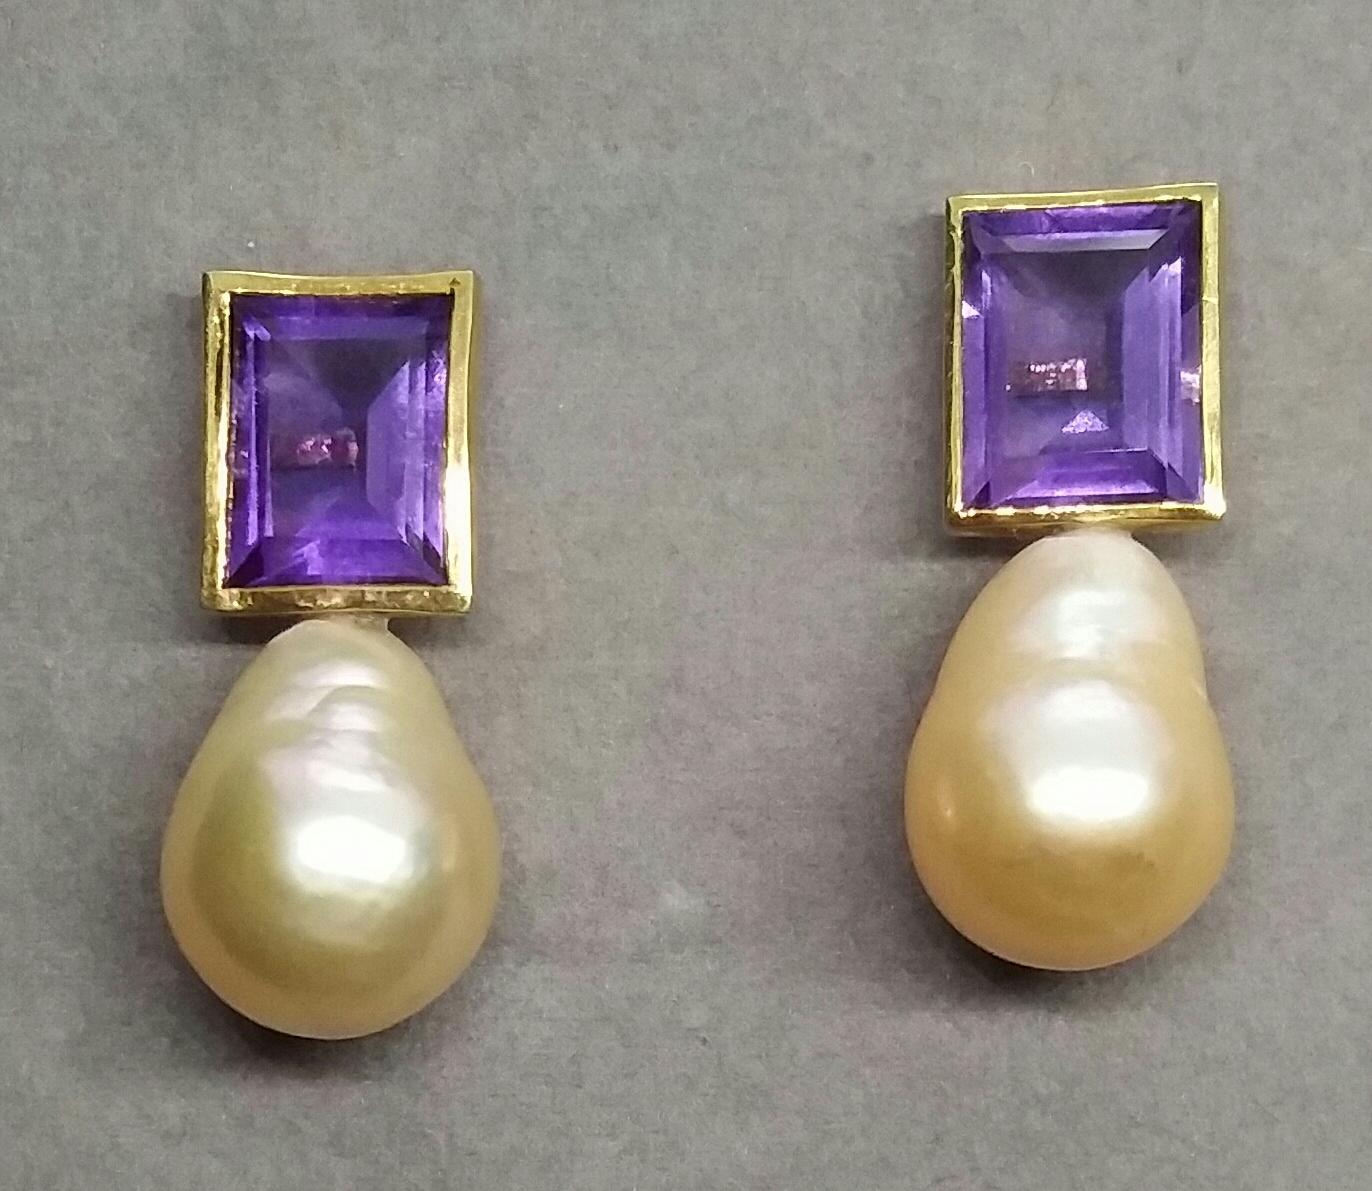 These simple but elegant Handmade Earrings have 2 faceted rectangular and perfectly clean Natural Amethysts measuring 9x11 mm and weighing 6 carats set in yellow gold bezel at the top to which are suspended 2  Natural Cream Color Pear Shape Baroque